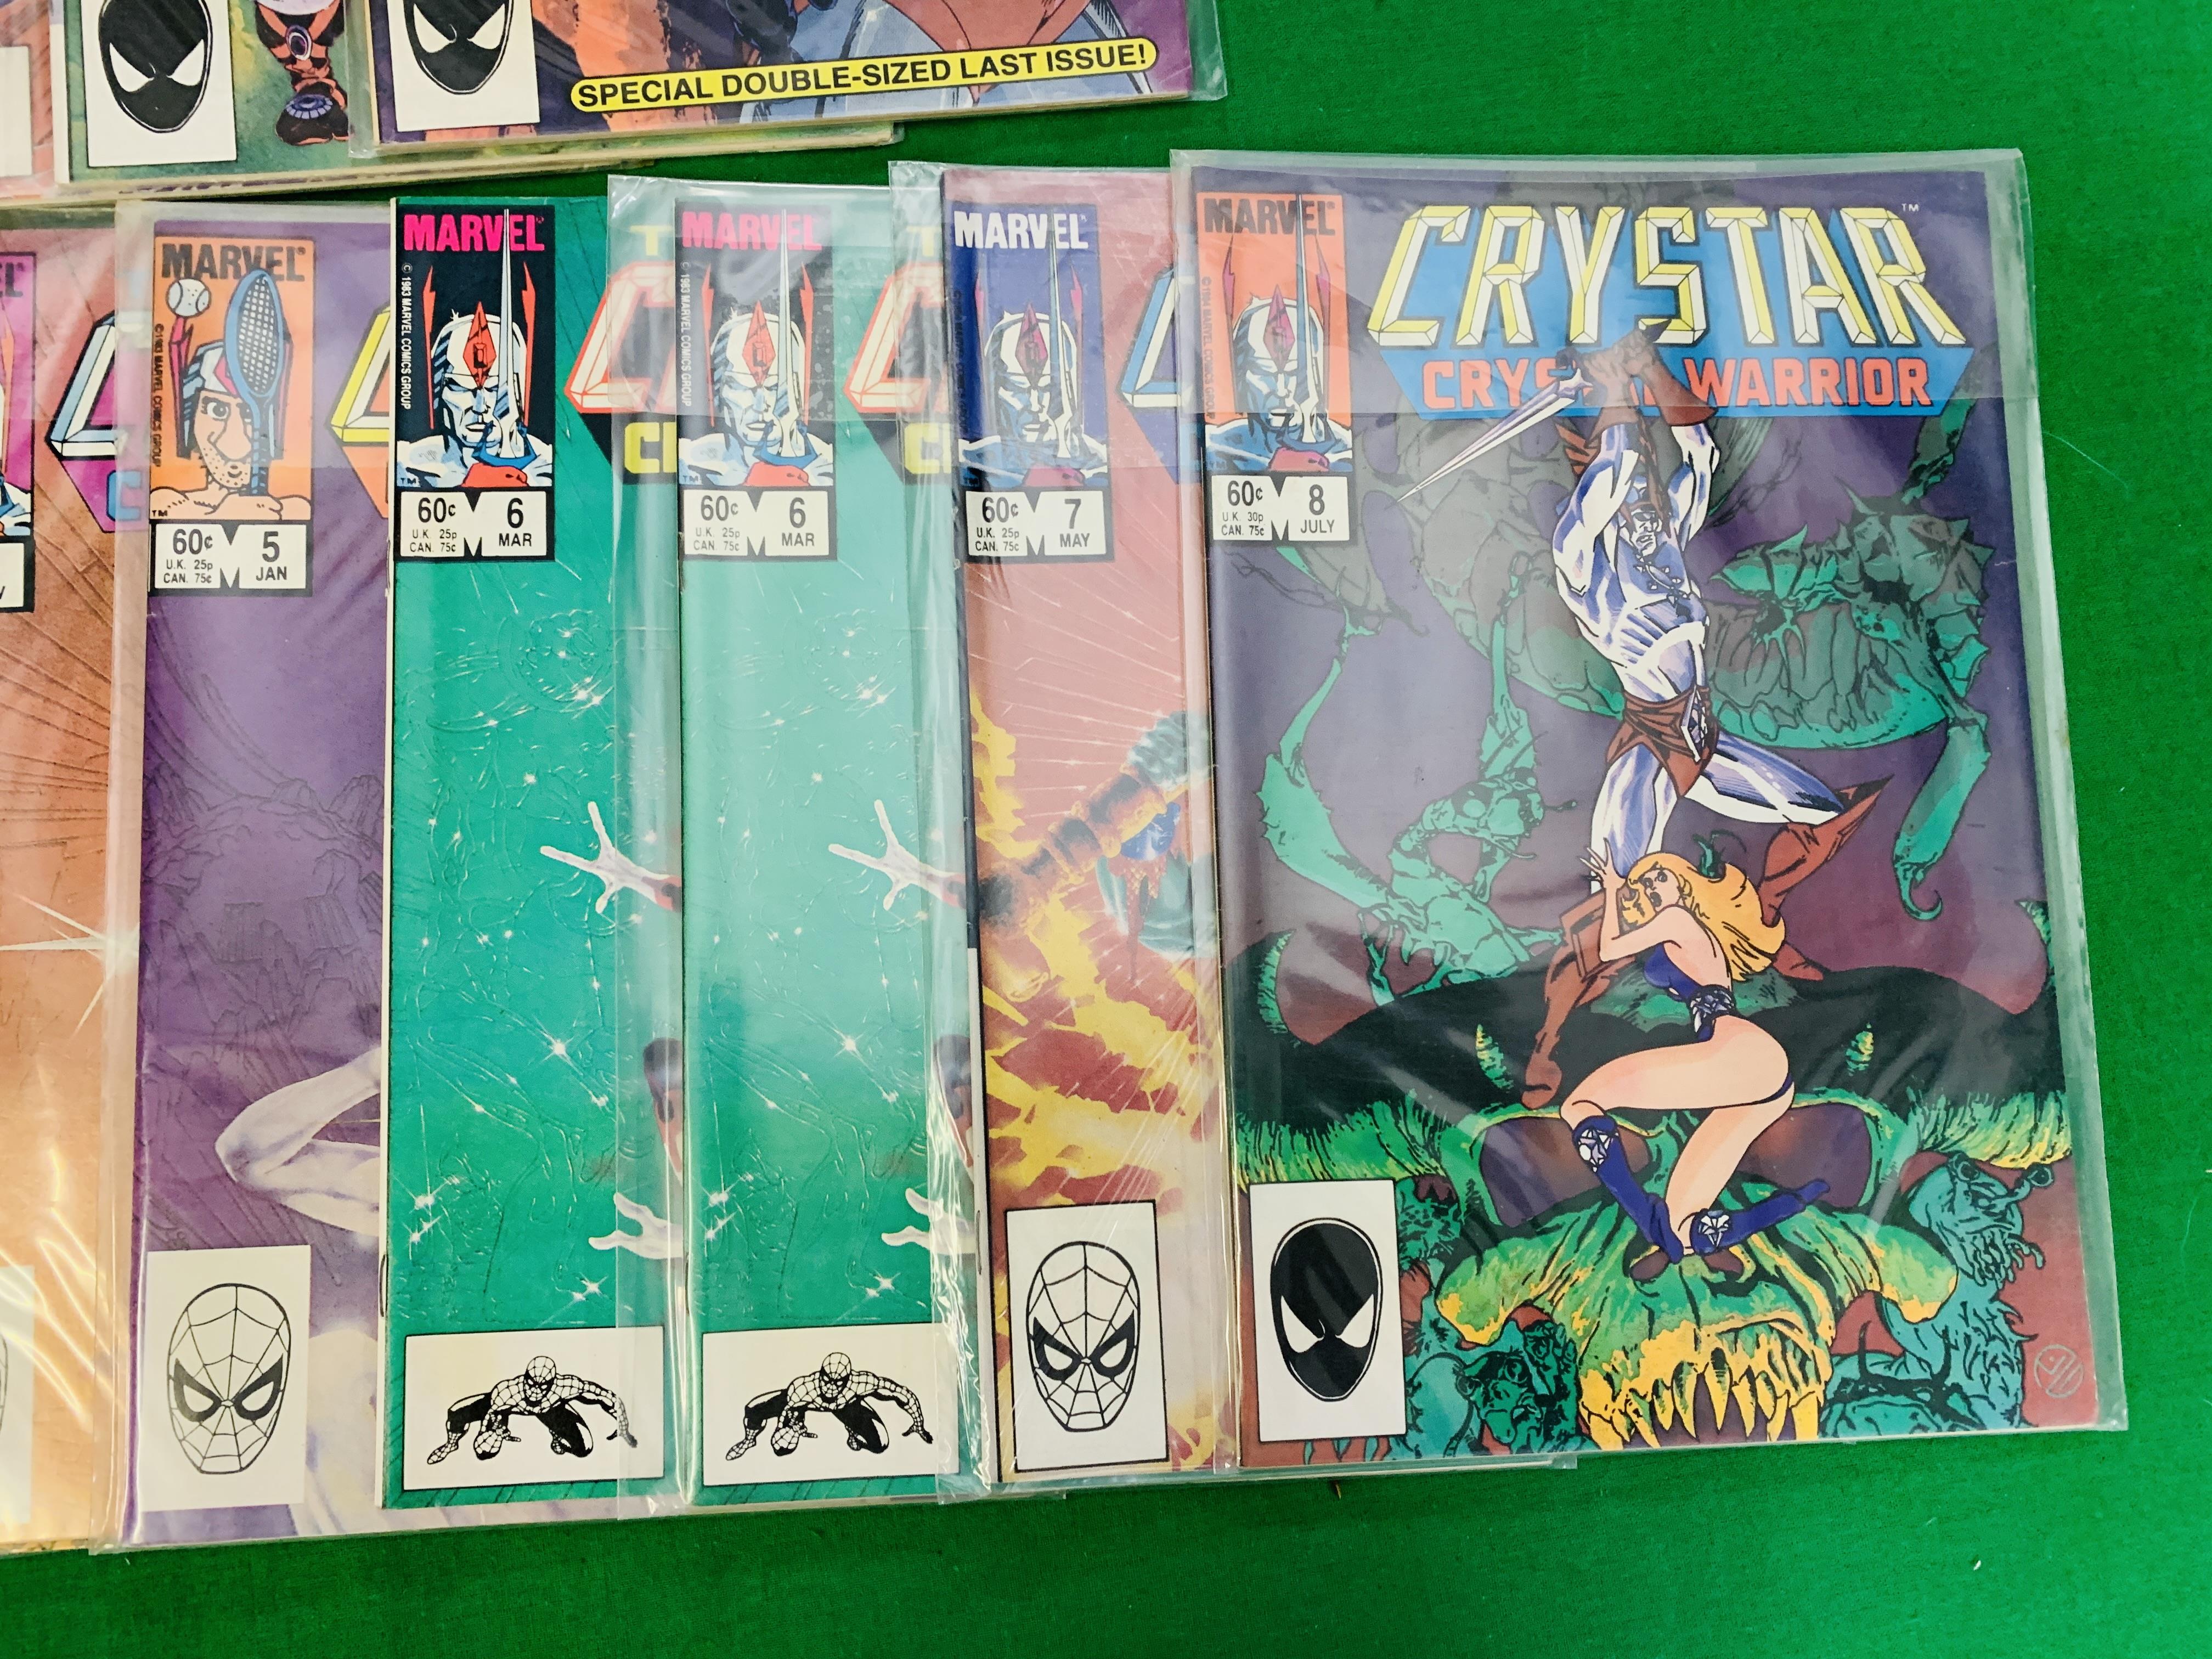 MARVEL COMICS CRYSTAR CRYSTAL WARRIOR NO. 1 - 11 FROM 1983, COUPLE OF DUPLICATES, INCLUDES NO. 8. - Image 3 of 4